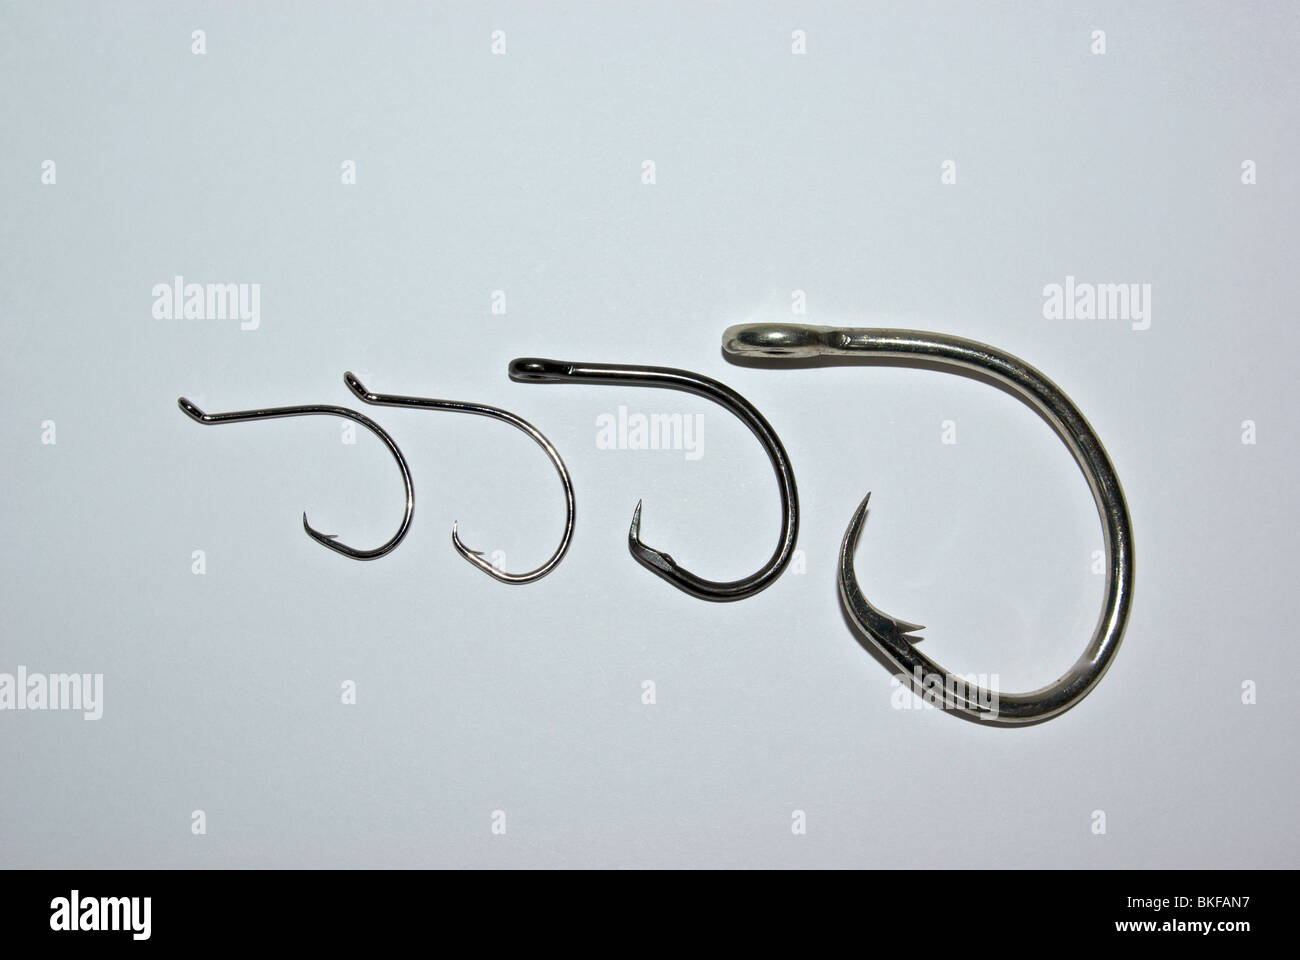 Barbed and barbless circle fishing hooks have curved points for